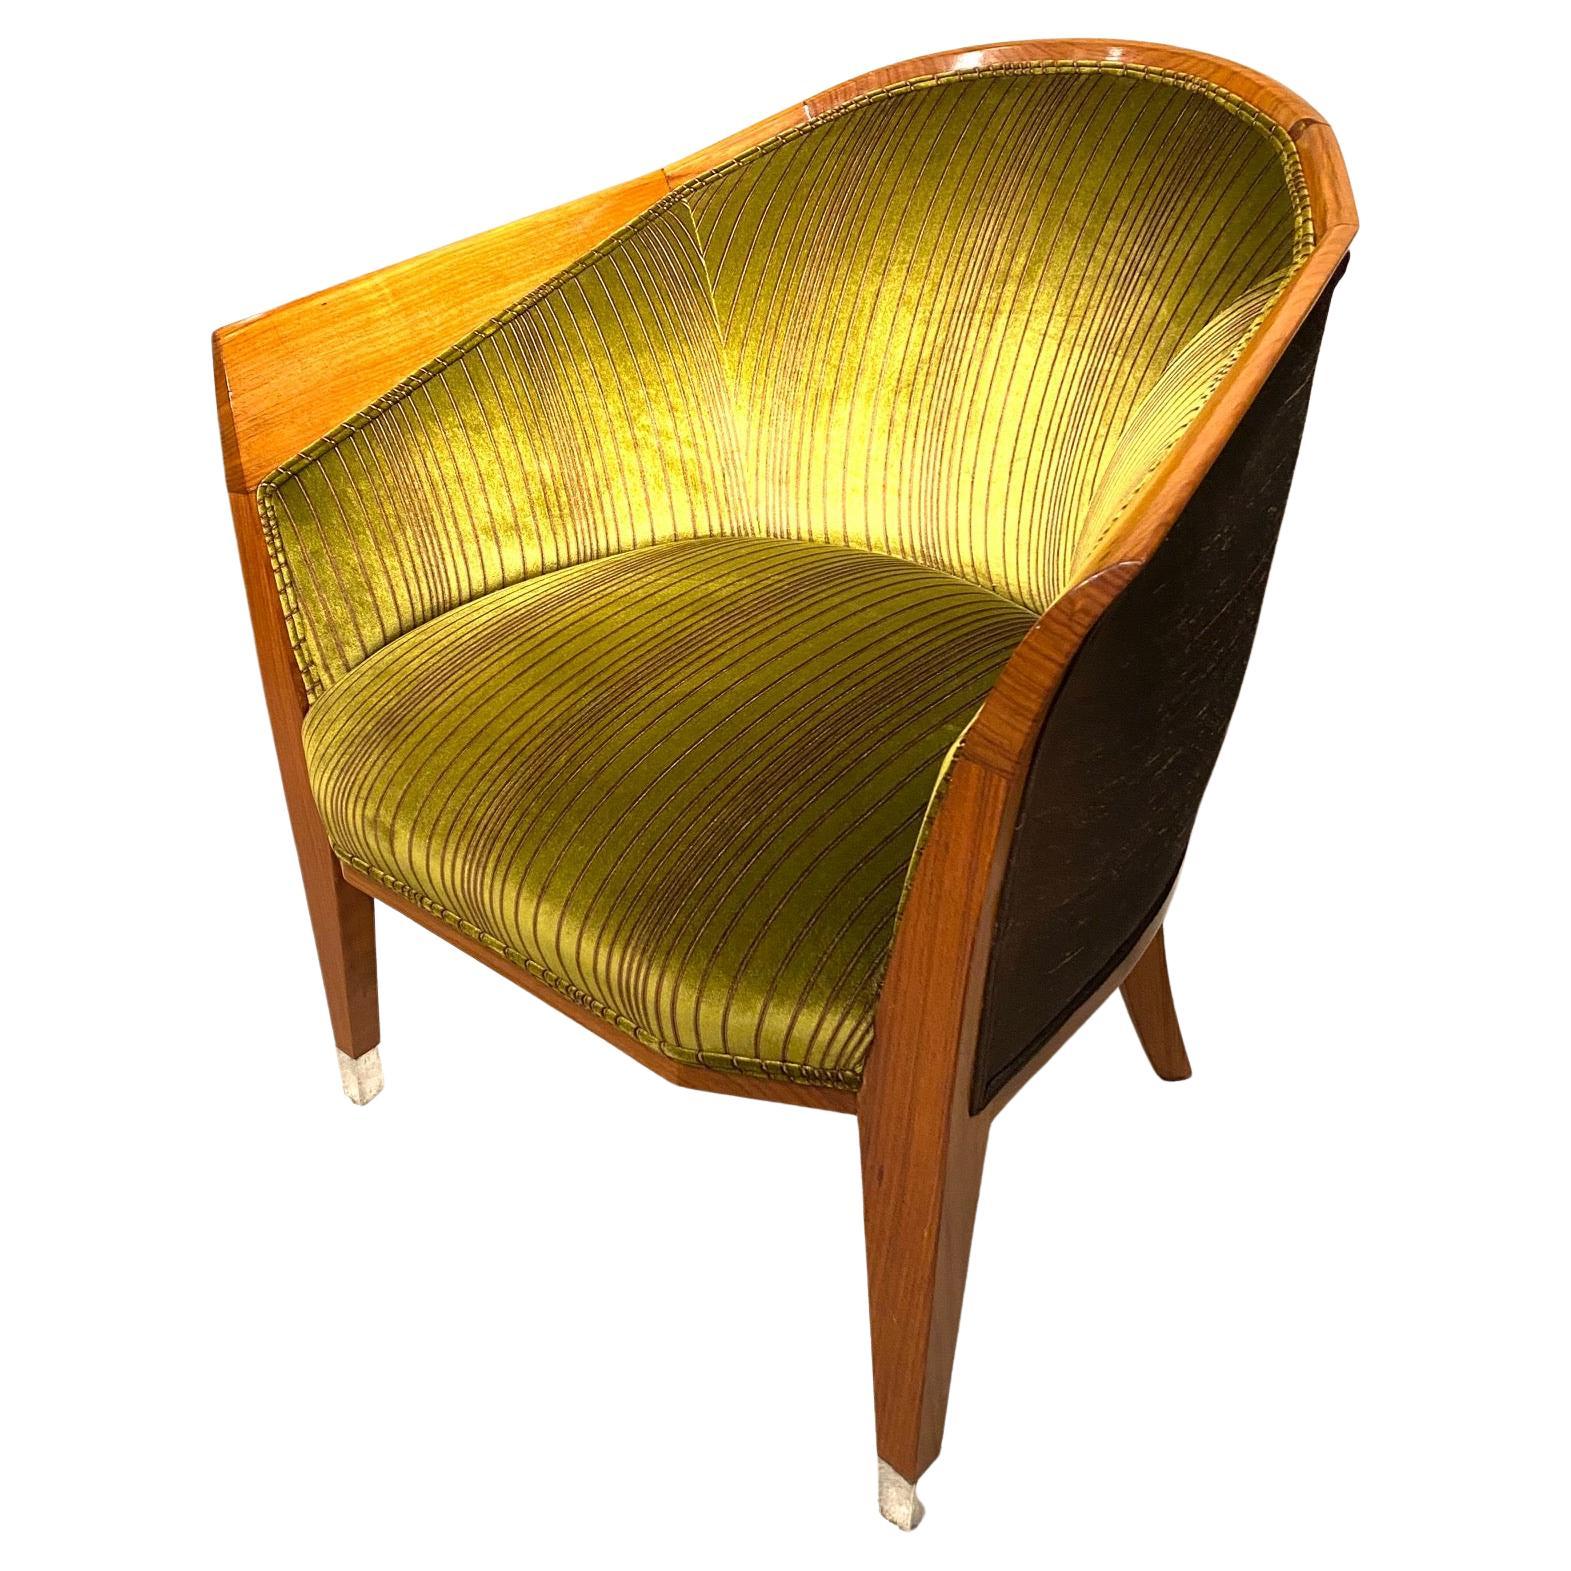 Rare French Art Deco Period Cherry Wood Armchair by Maison Dominique For Sale